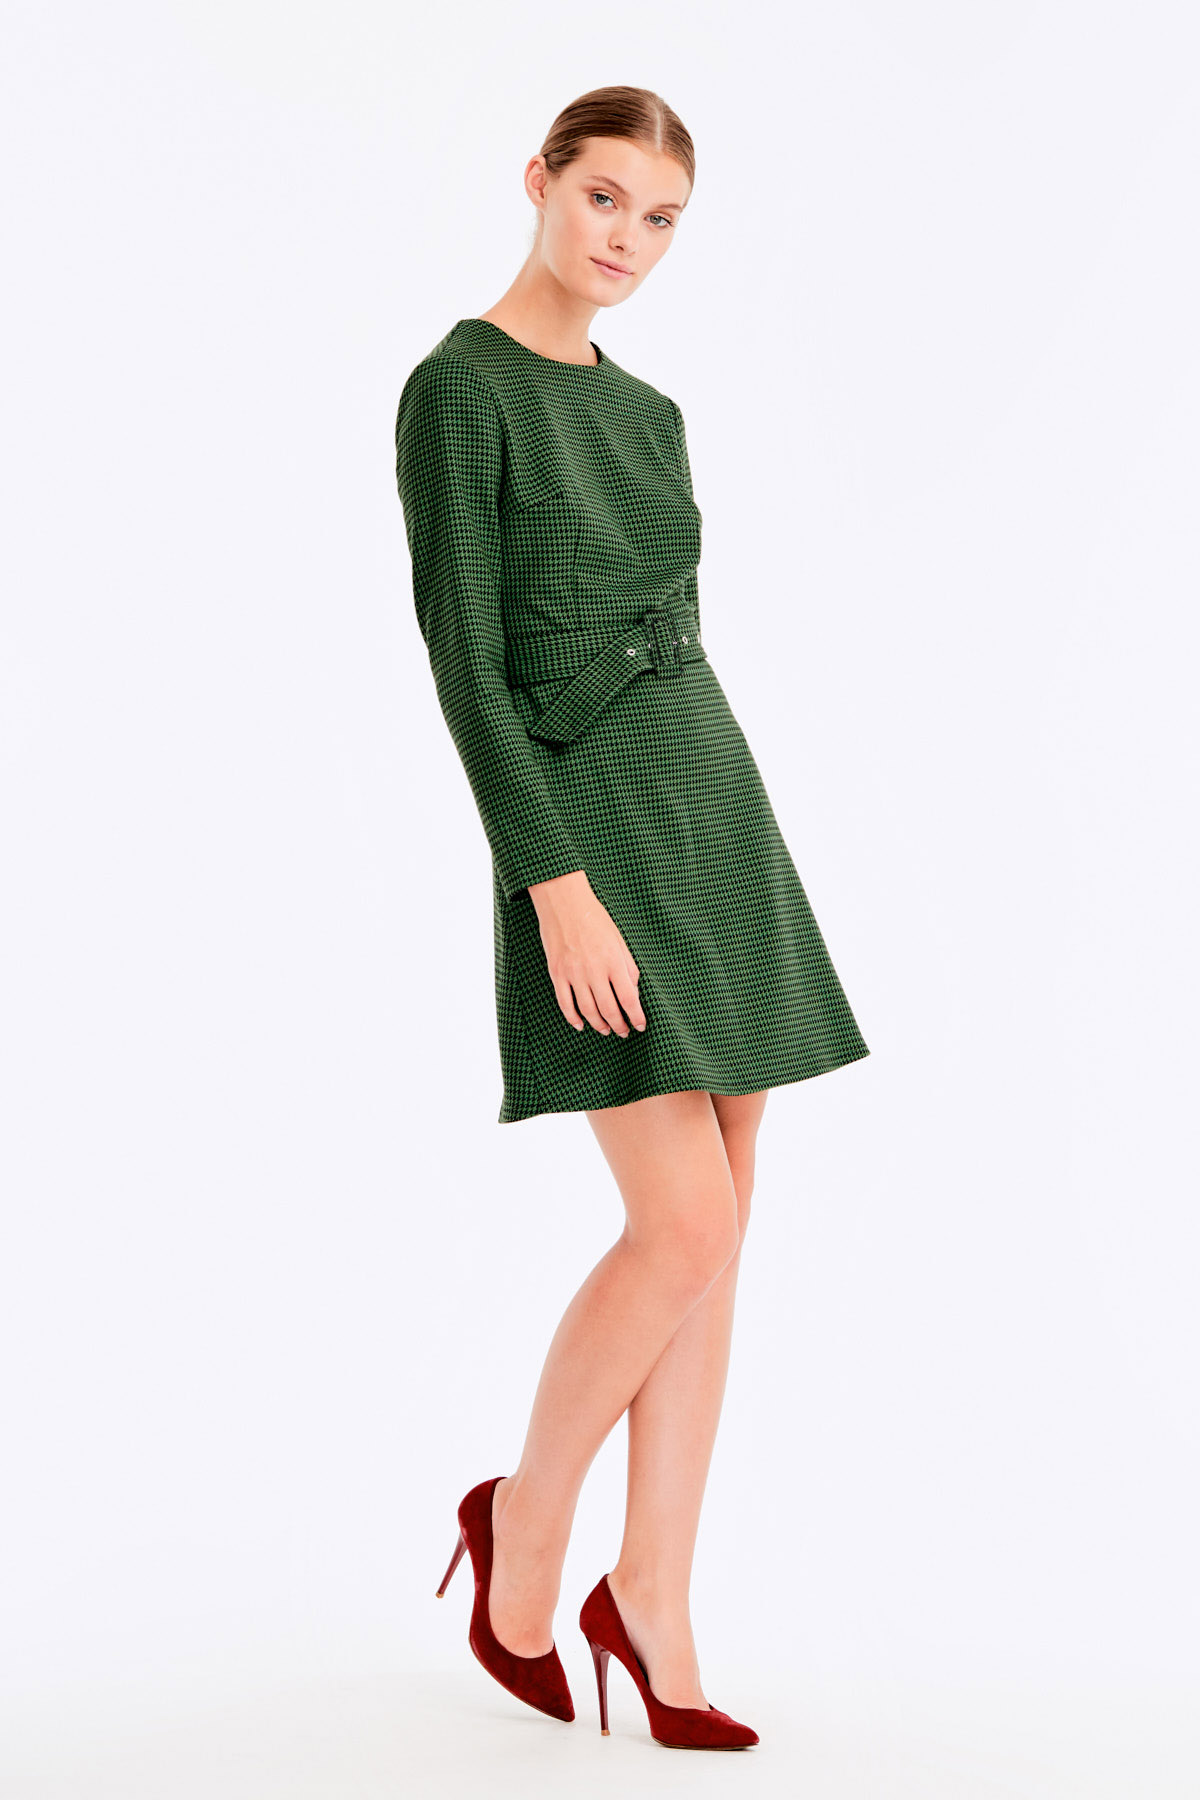 Green dress with a houndstooth print, photo 8